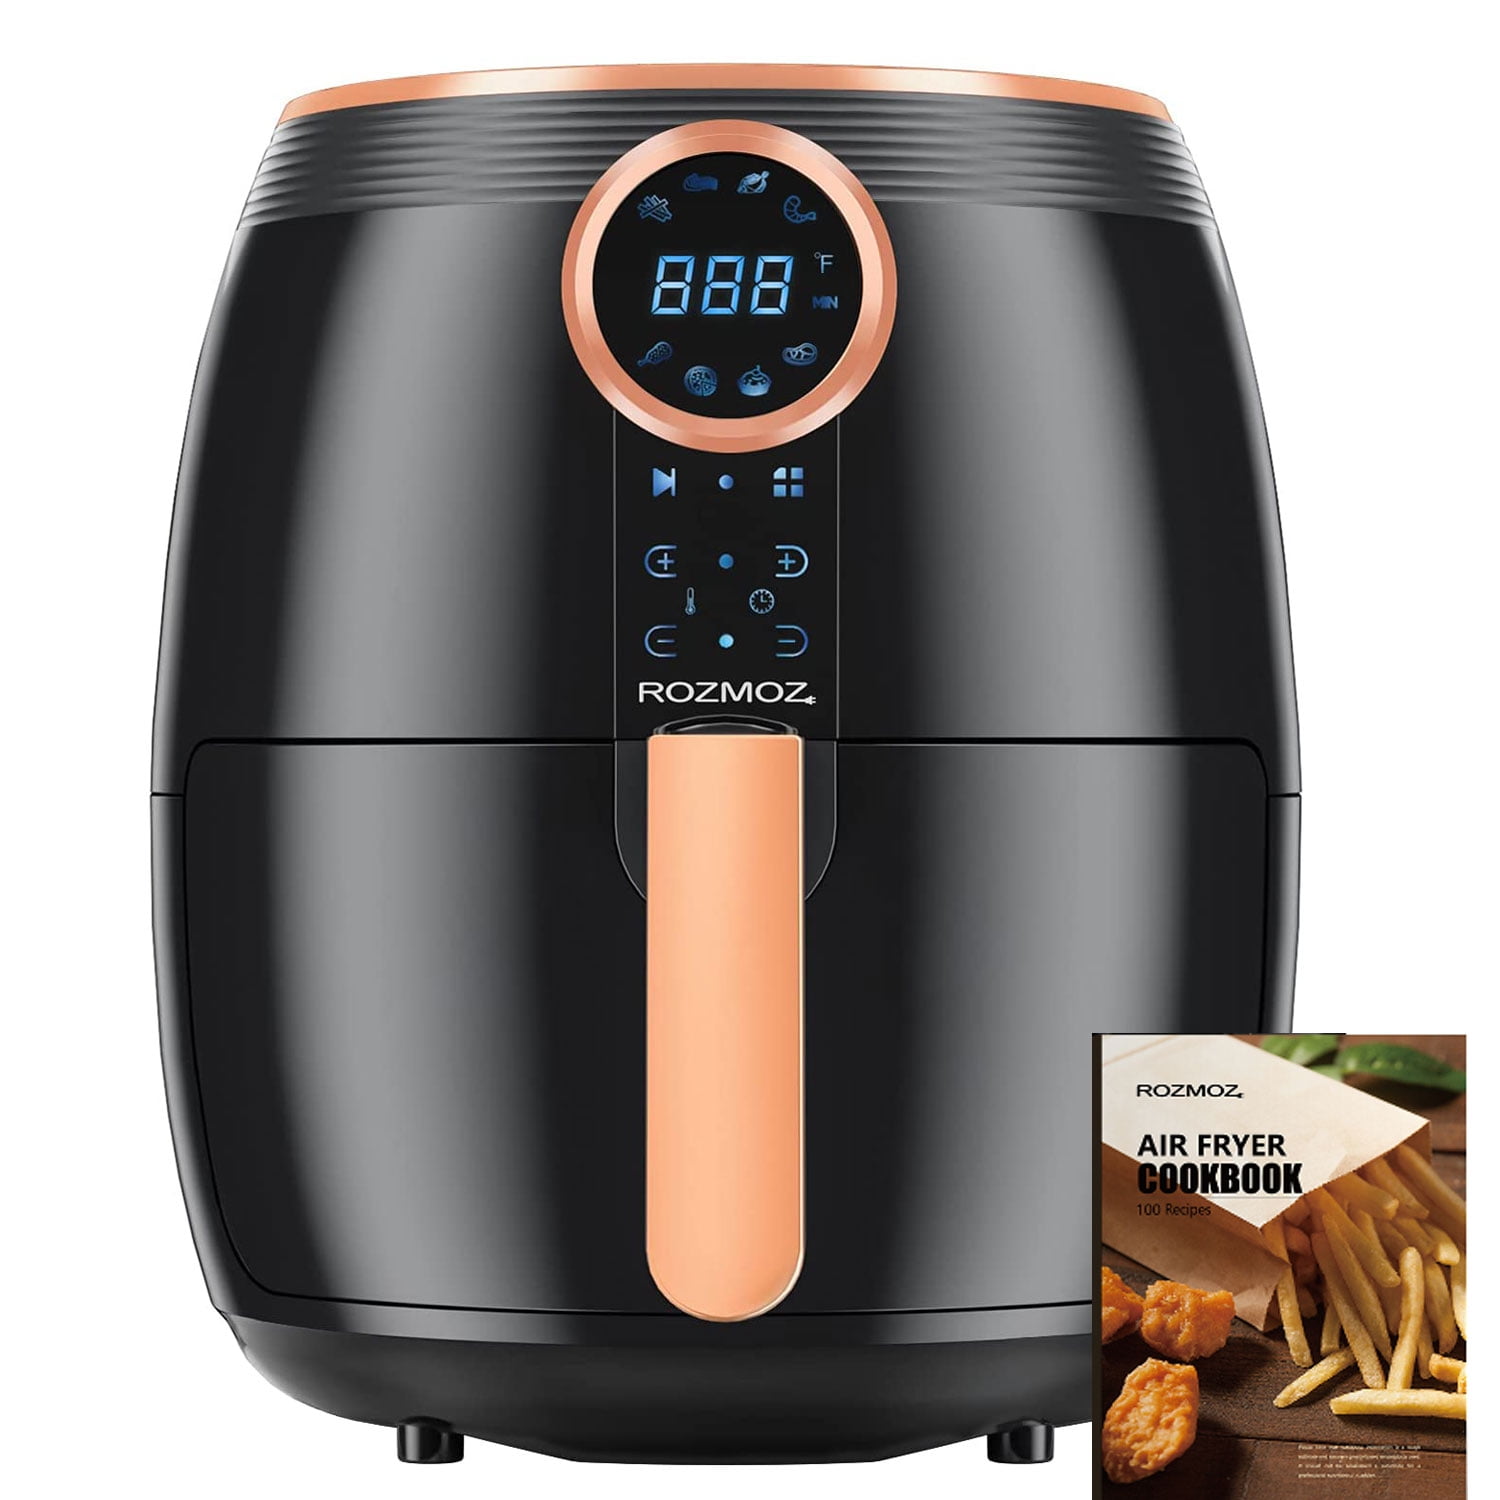 Cooks Professional Digital Air Fryer Oven with Rotisserie 11L Oil